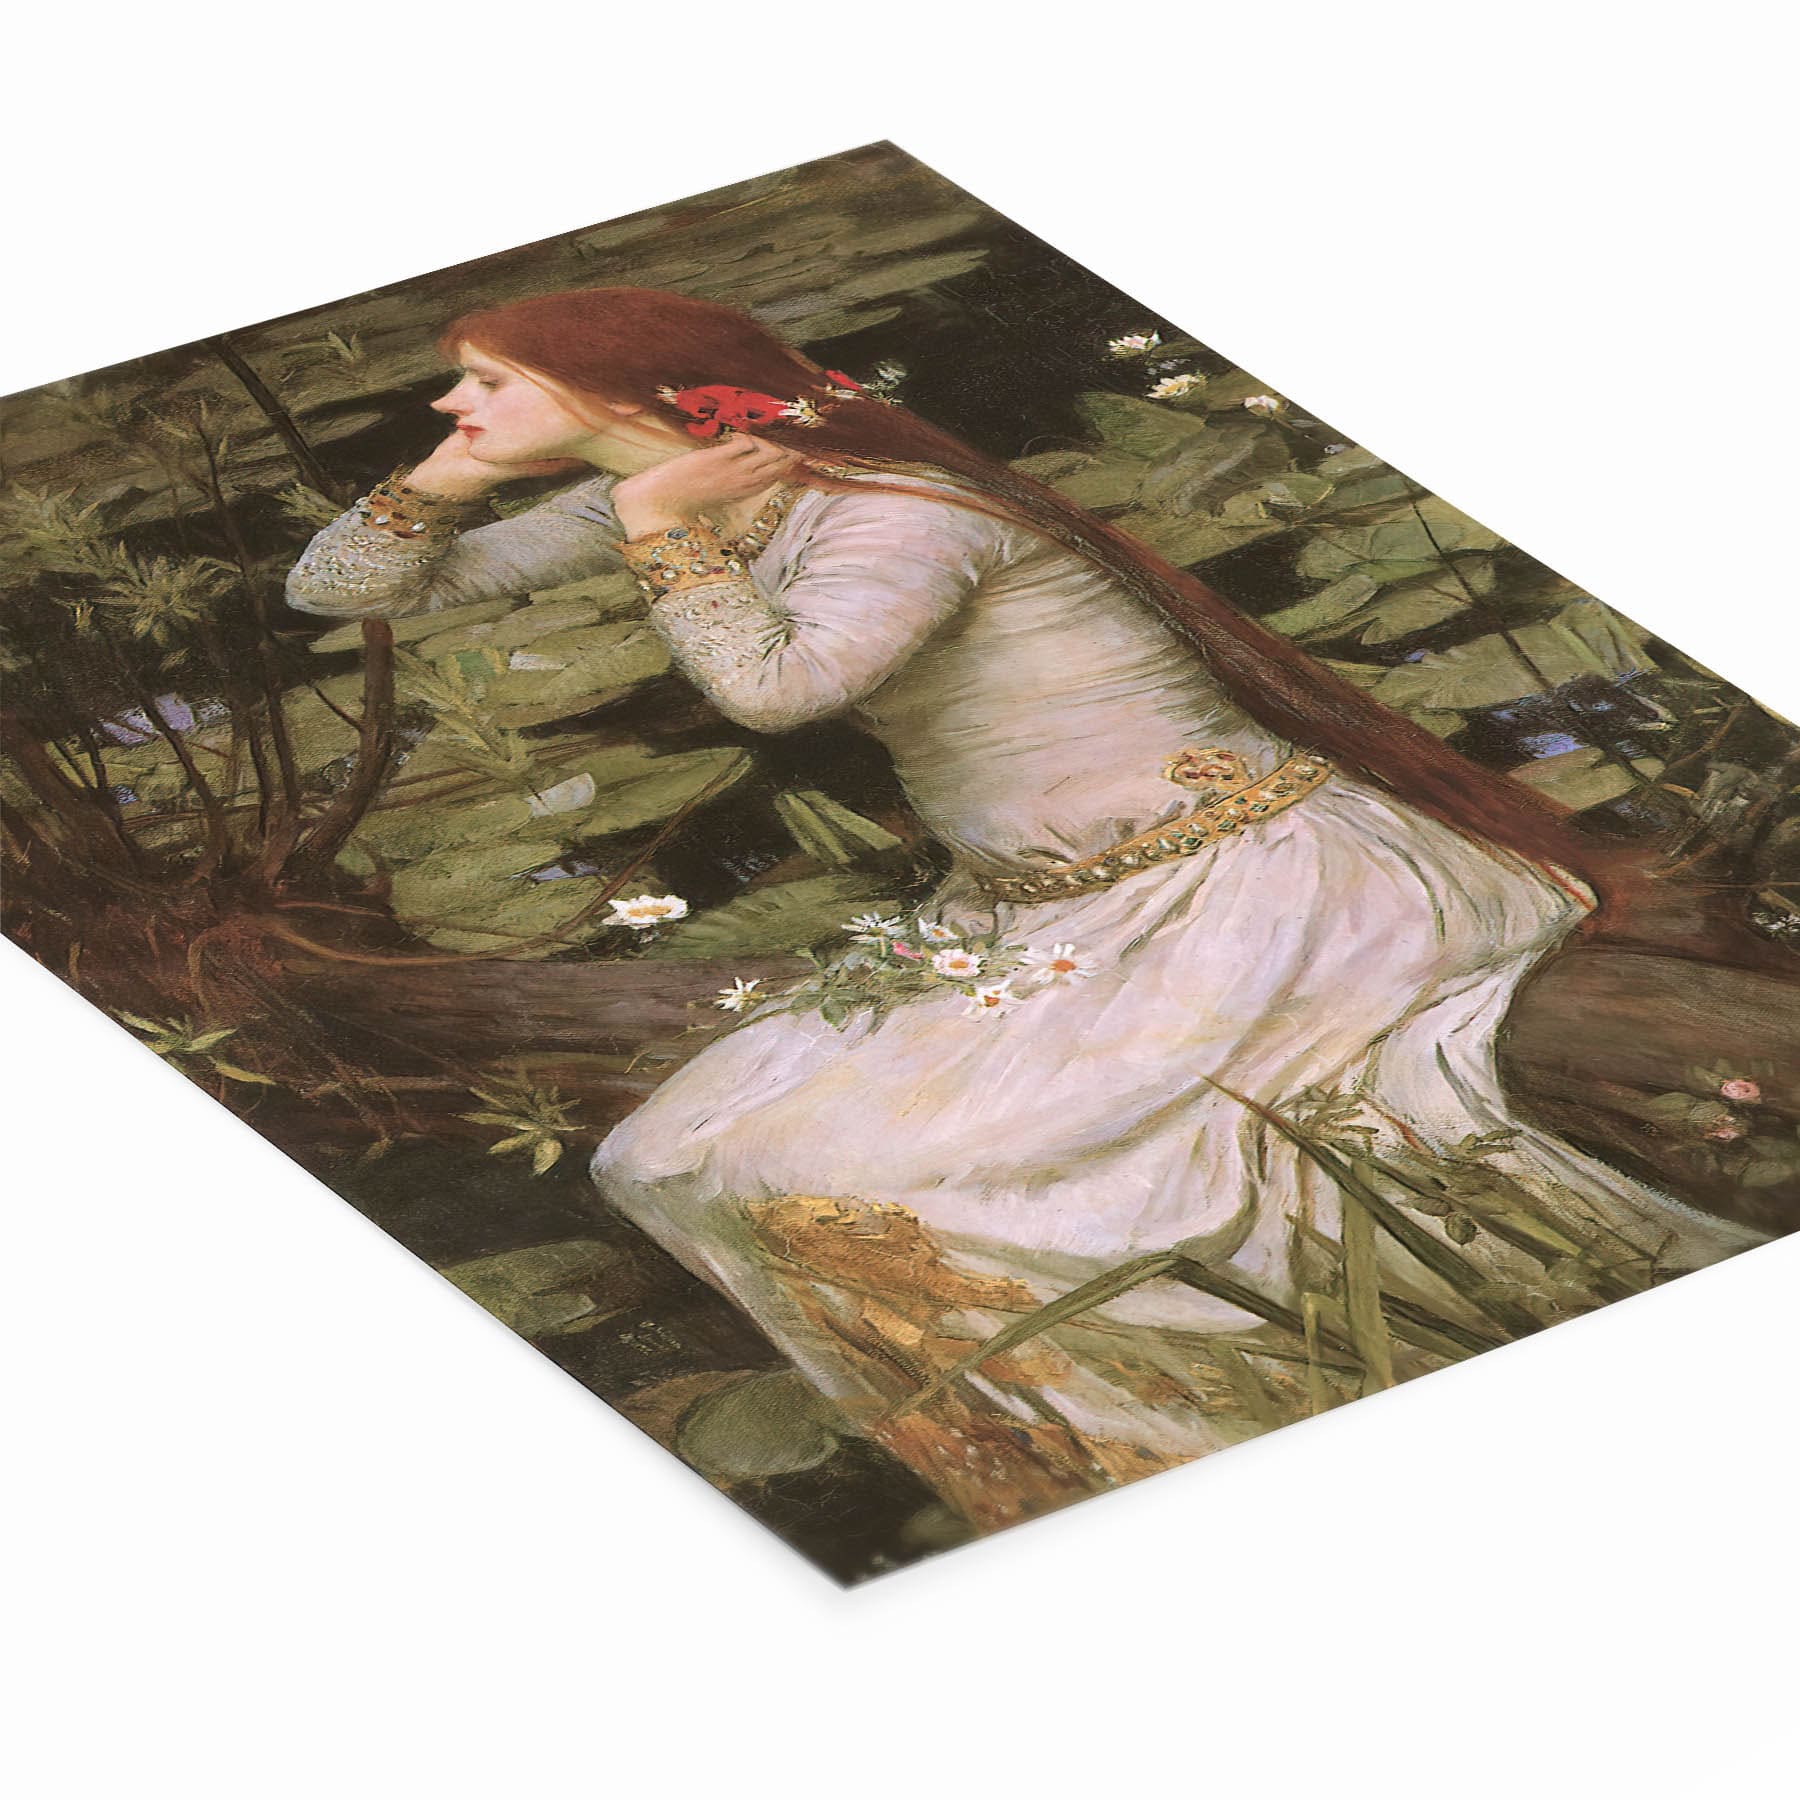 Girl with Red Hair and White Dress Painting Laying Flat on a White Background